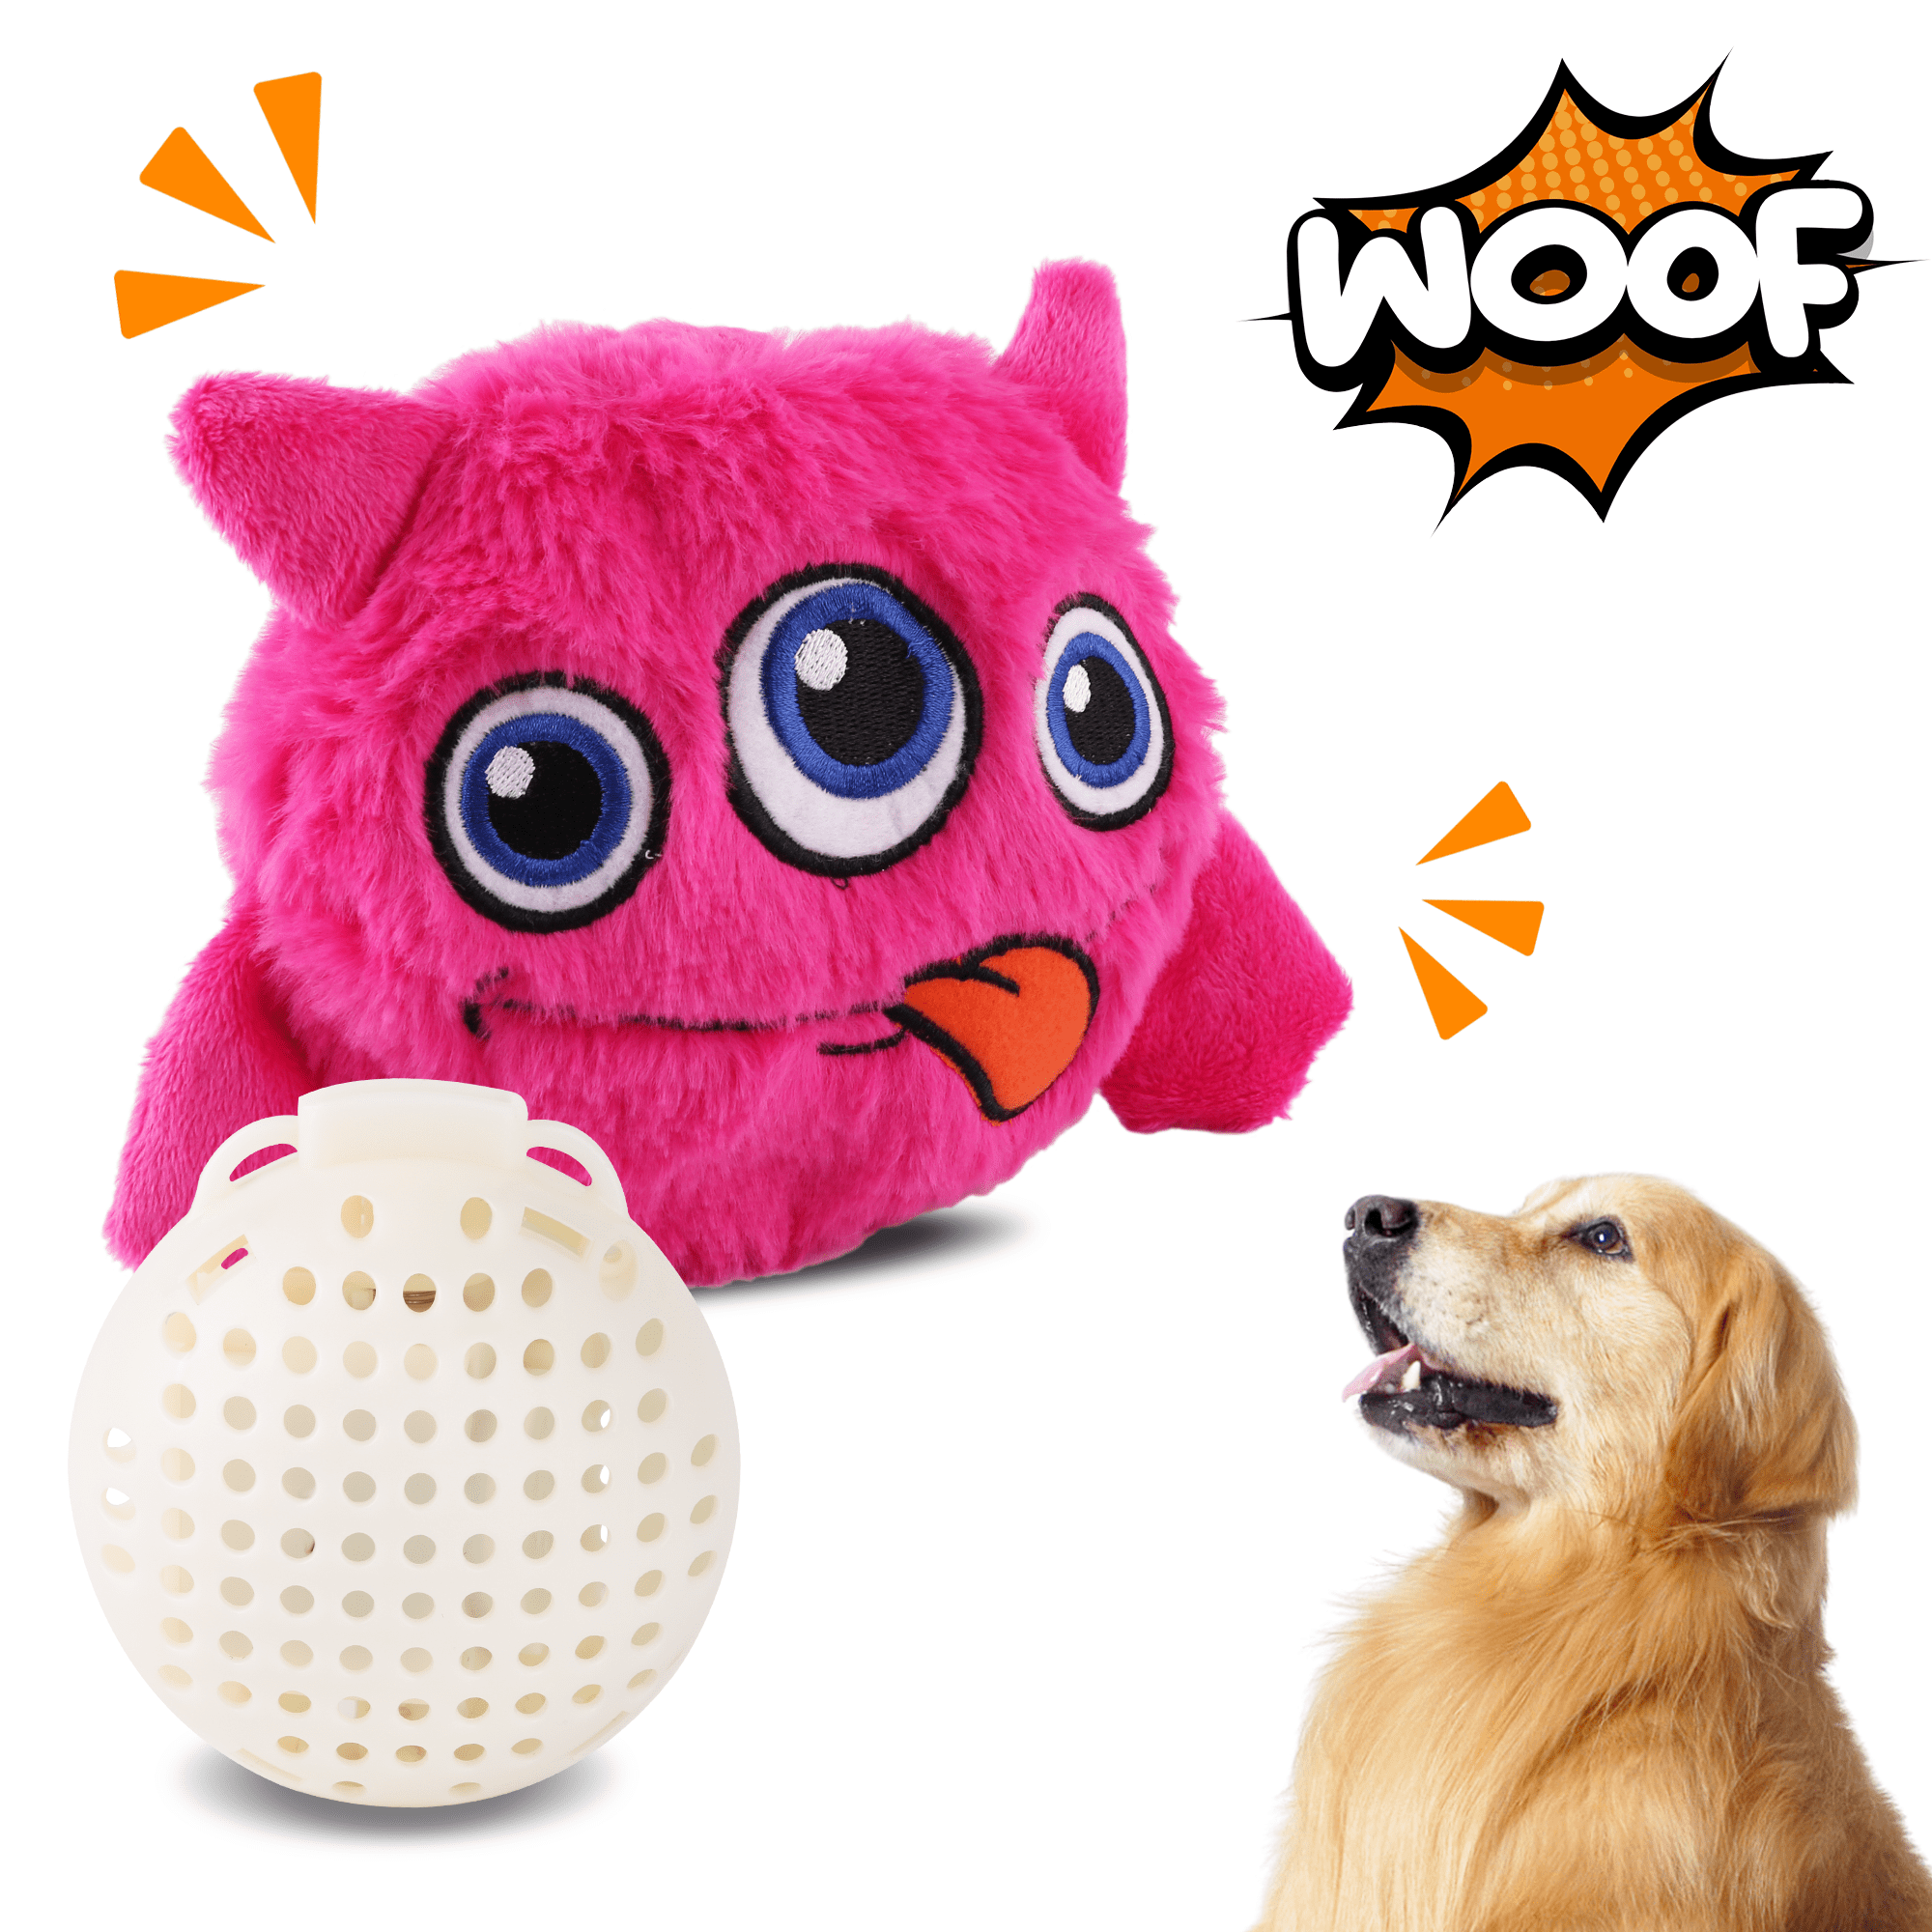 Petbobi Interactive Dog Toys Plush Monster Dog Toy Squeaky Crazy Bouncer  Ball Battery Operated for Small and Medium Puppy to Self Play, Rock Bobby